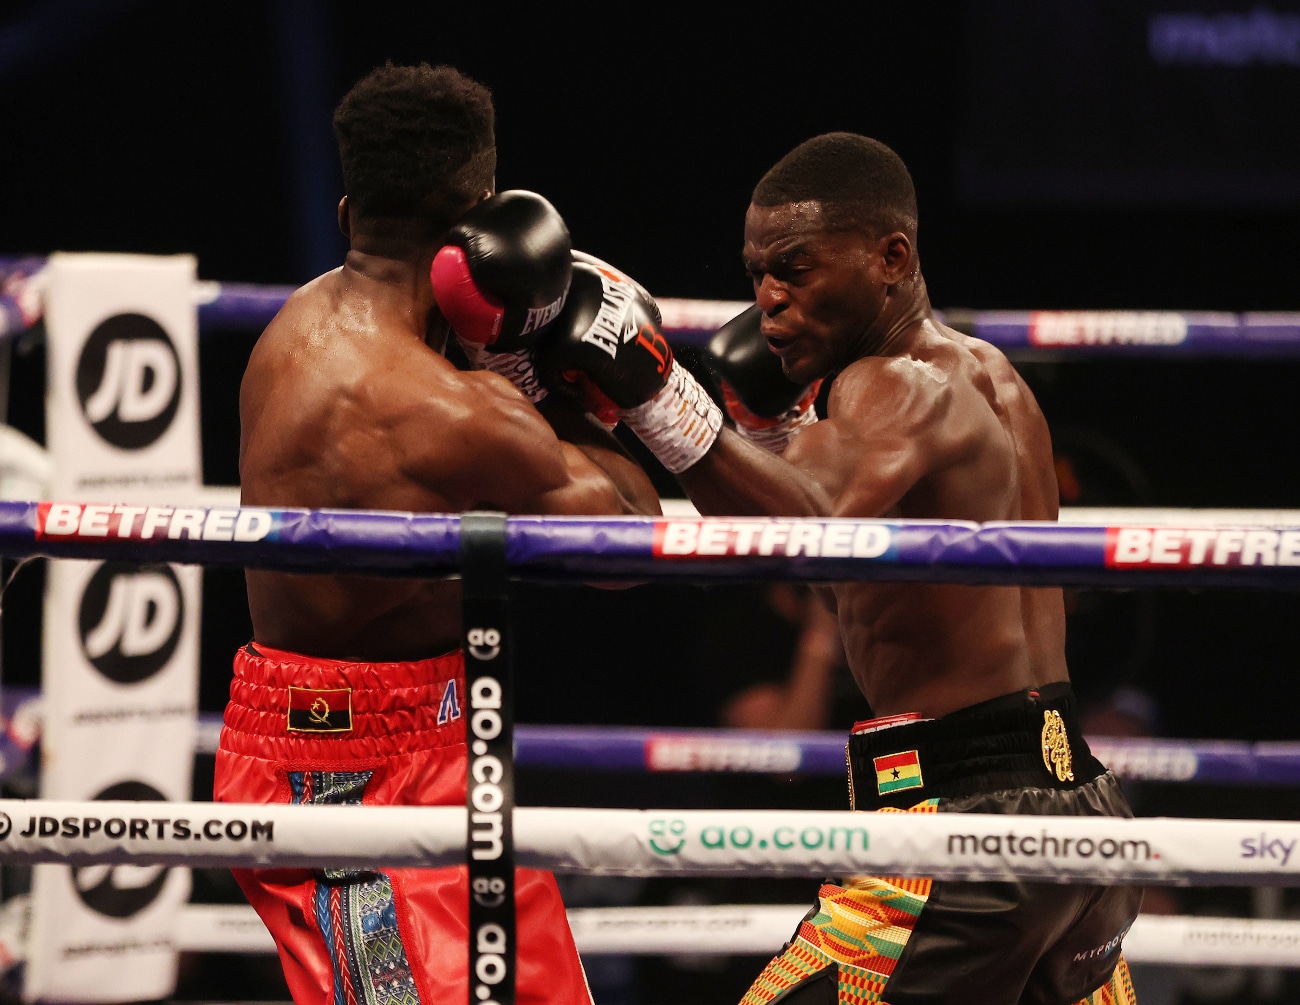 Buatsi beats Dos Santos by 4th round knockout